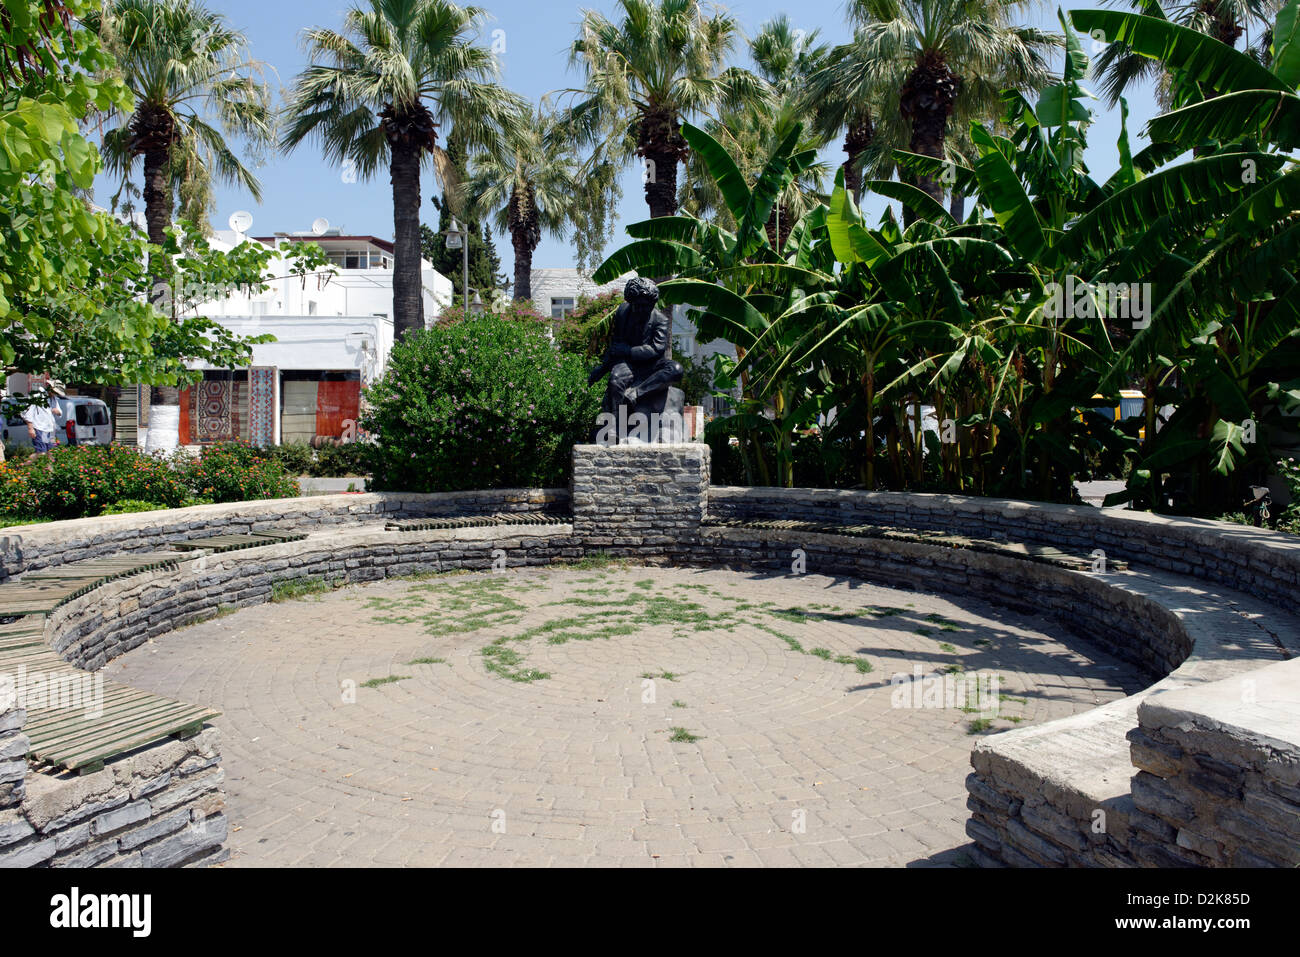 Bodrum Turkey. Statue of the Turkish Poet and Nay Player Neyzen Tevfik who was born in Bodrum. Stock Photo